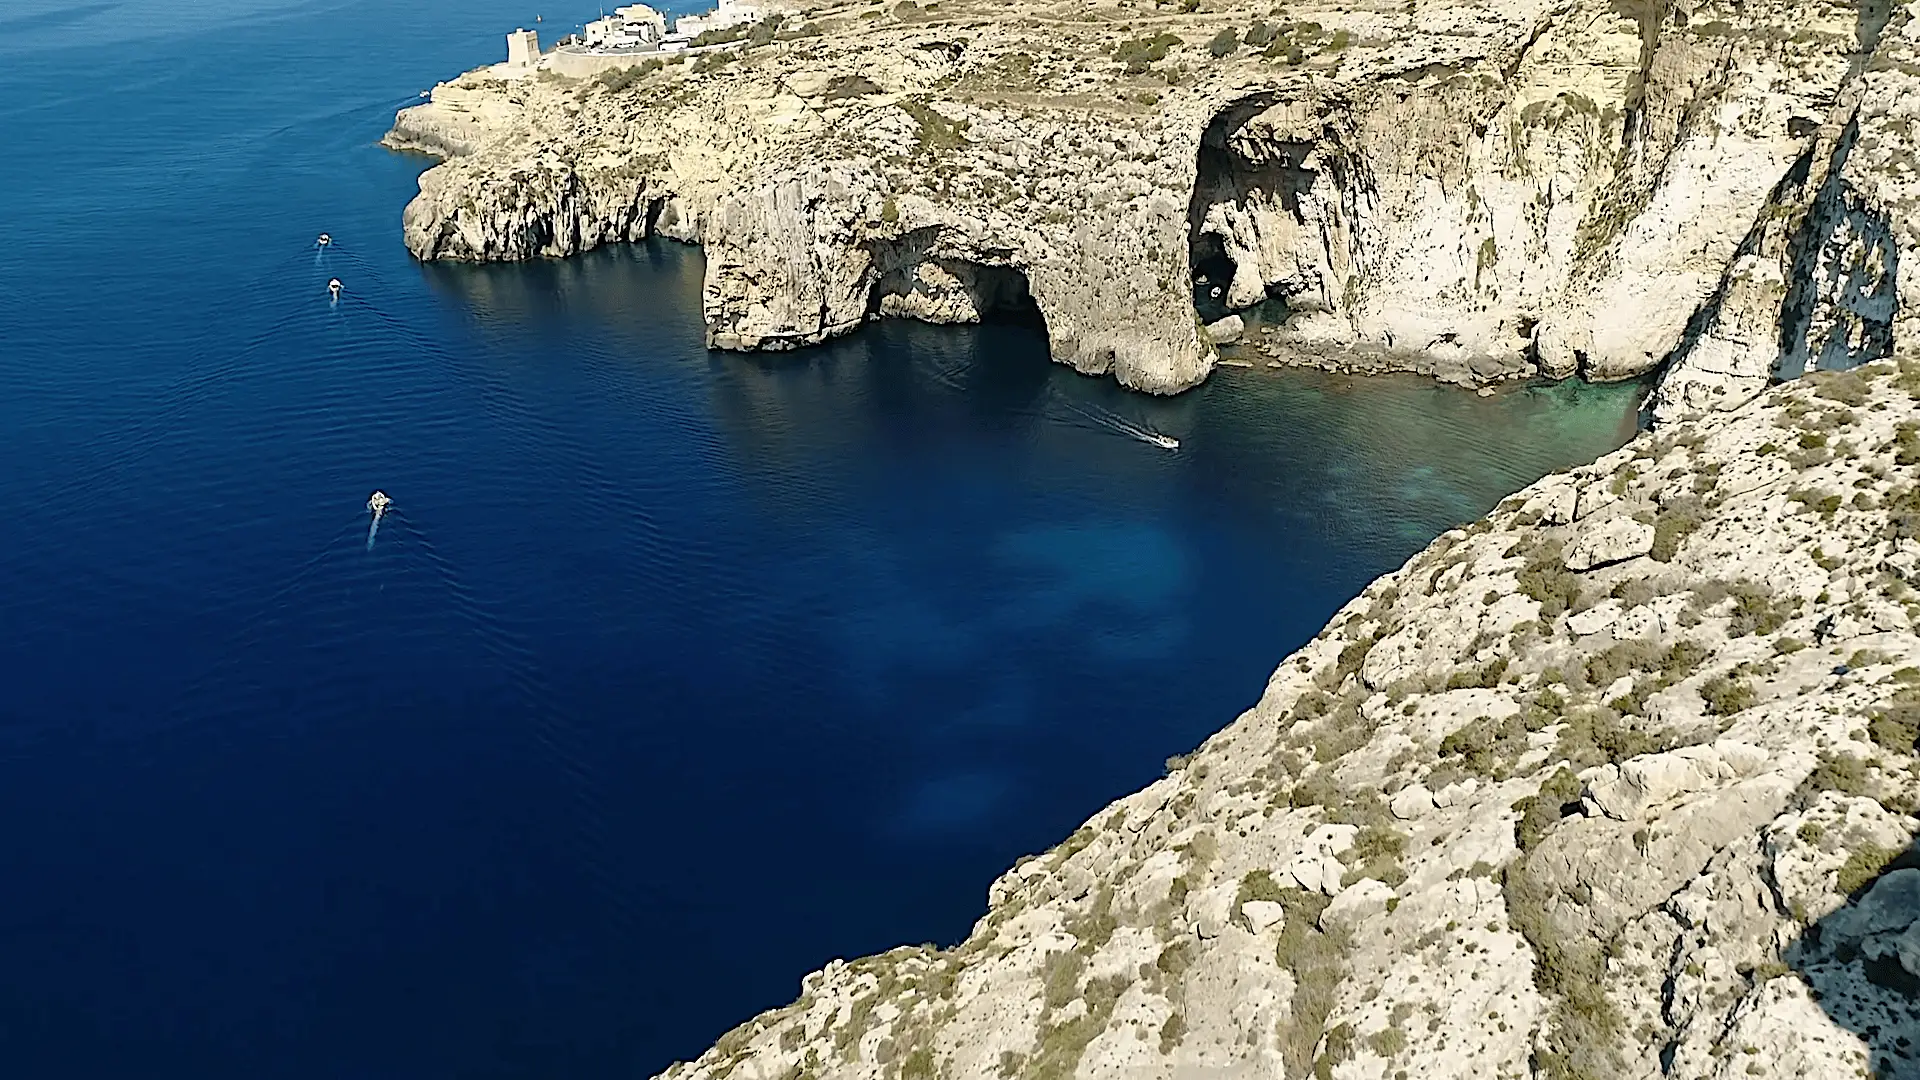 Blue Grotto Arch viewed from the cliff